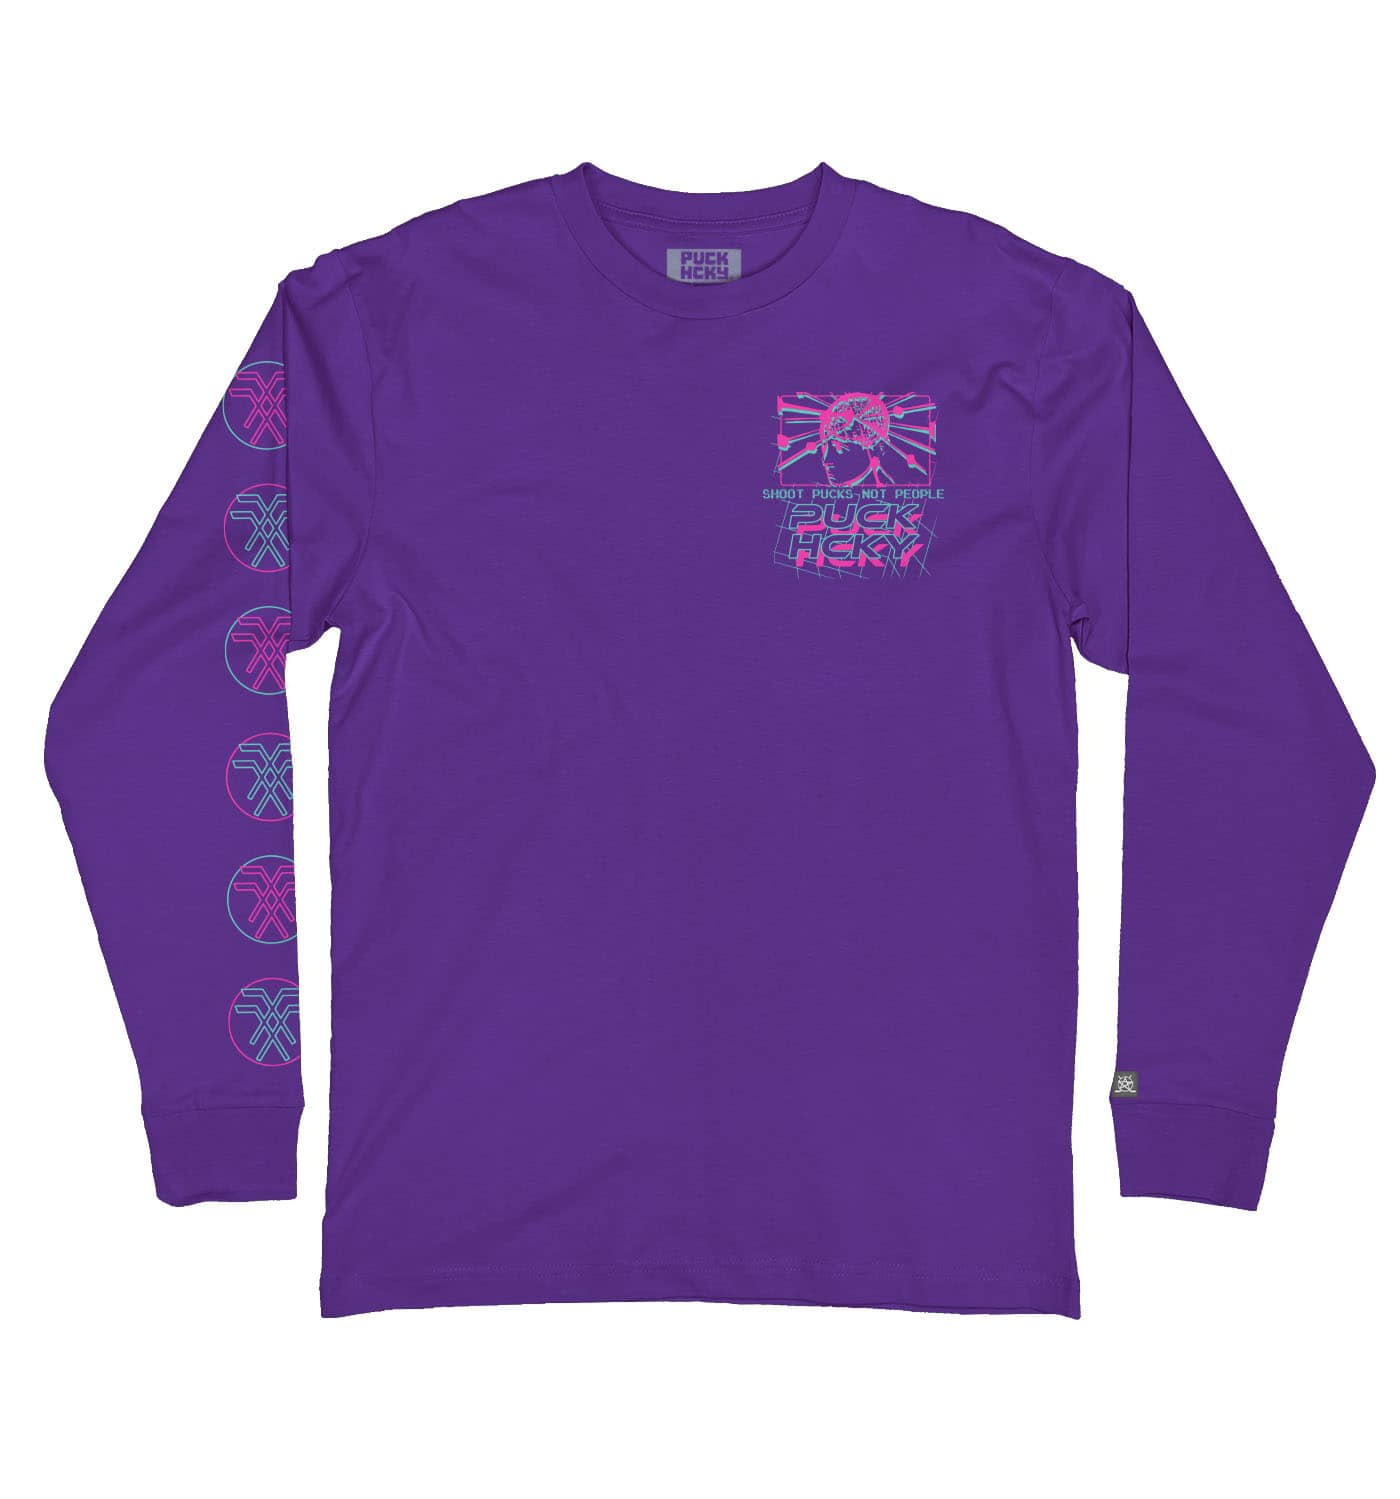 PUCK HCKY 'VAPORWAVE' long sleeve hockey t-shirt in purple front view